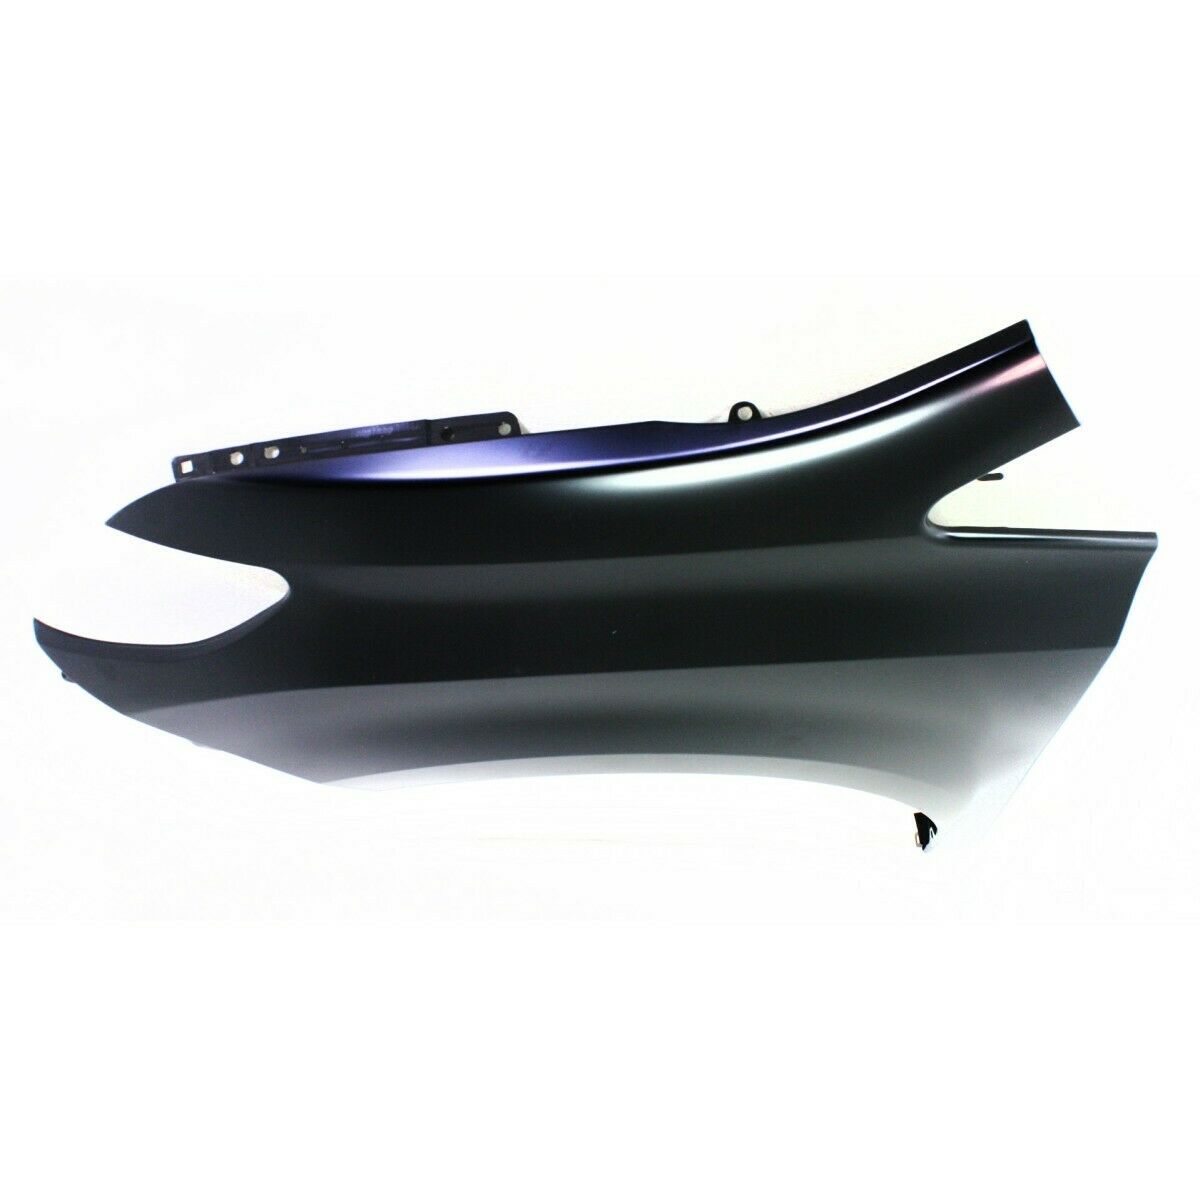 Toyota Sienna 2011 - 2020 Driver Side Fender 11 - 20 TO1240234 Bumper-King